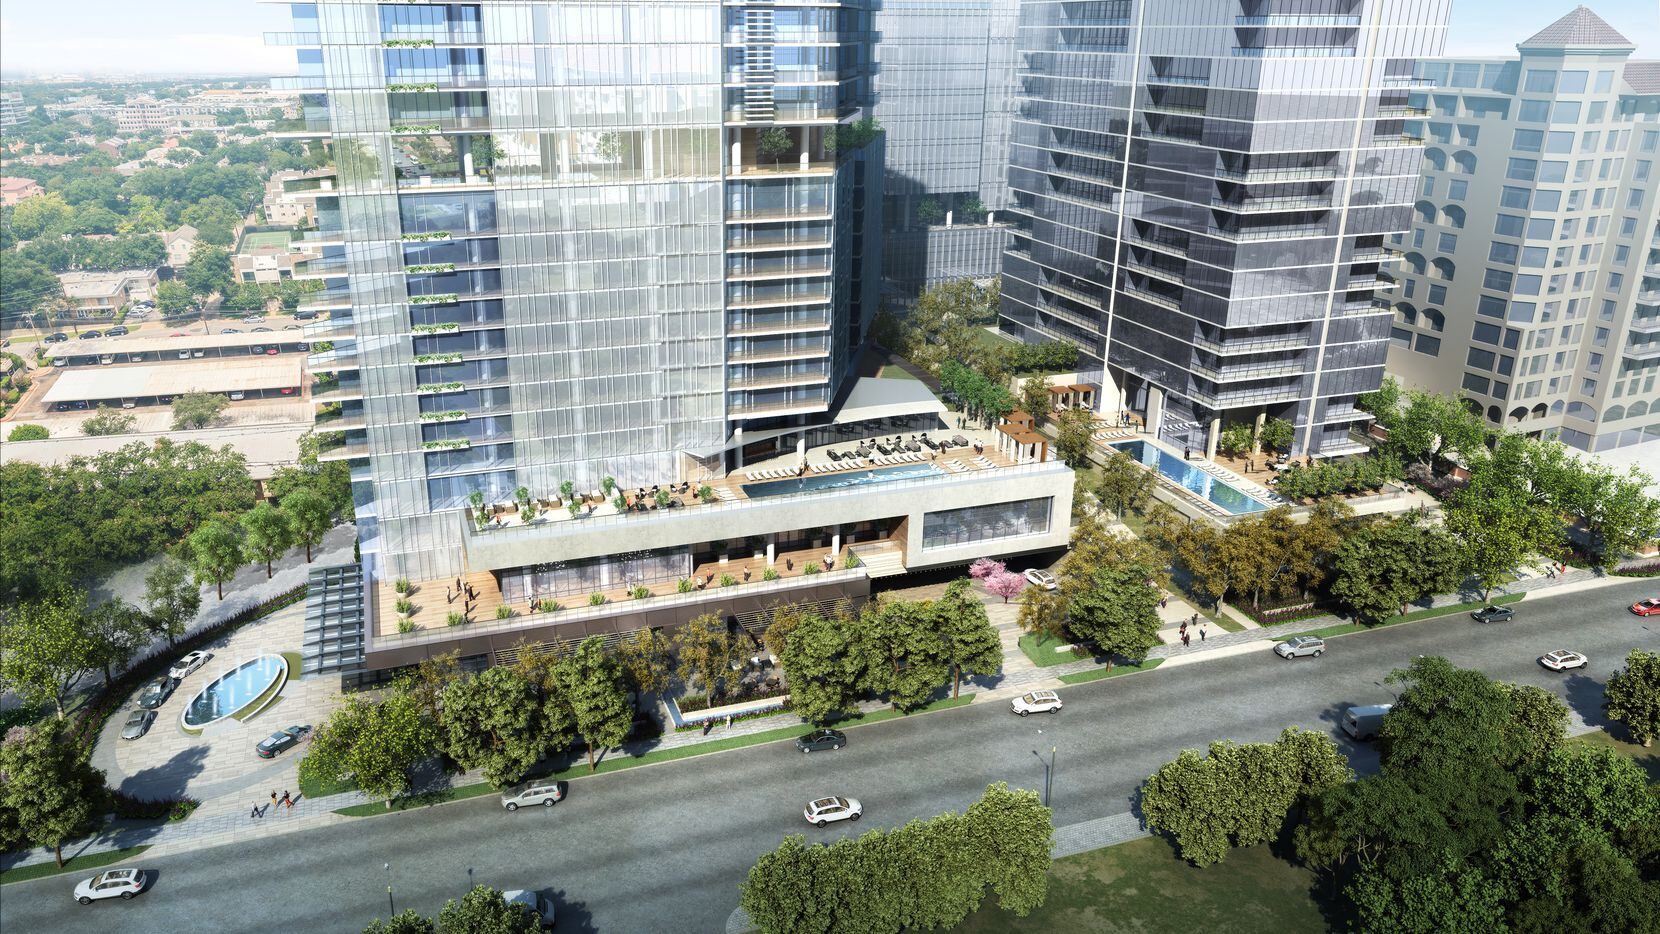 Developers previously planned to build a high-rise mixed-use project on the property.